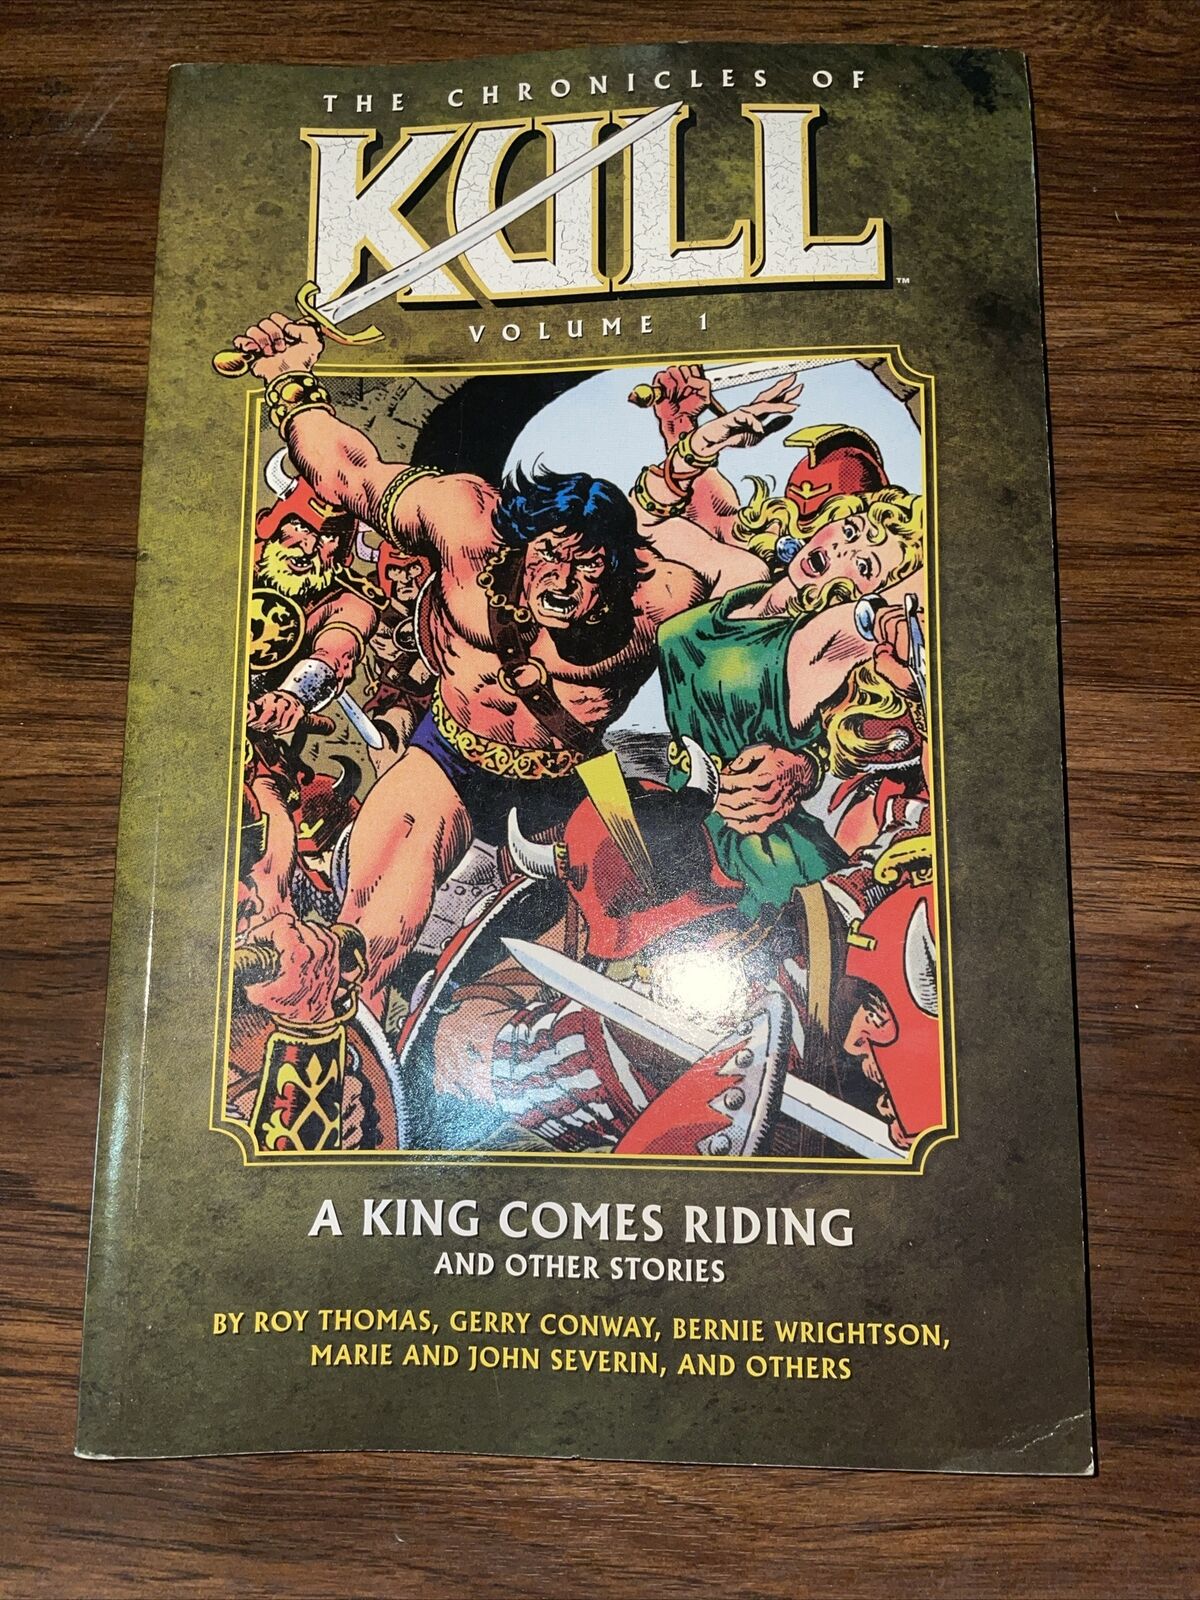 The Chronicles of Kull Volume 1 A King Comes Riding and Other Stories